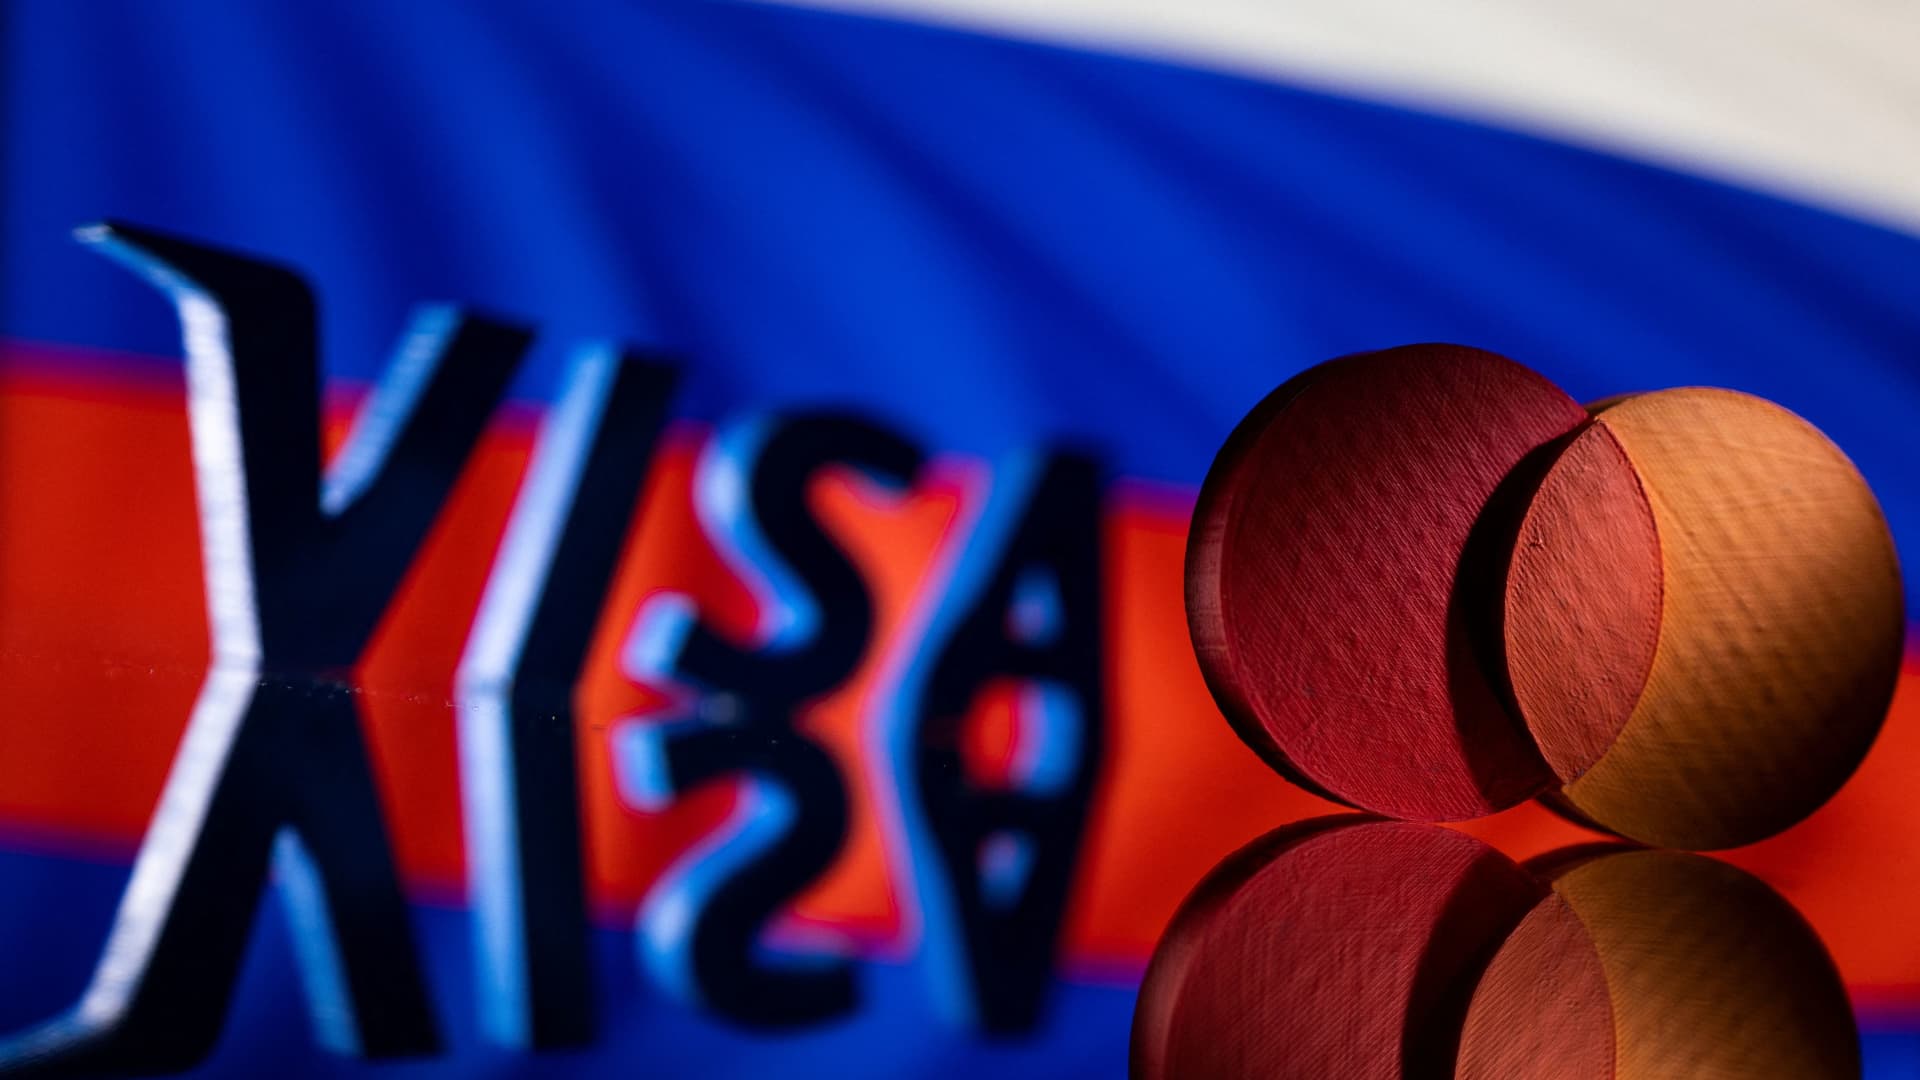 Visa and Mastercard logos are seen in front of Russian flag in this illustration taken March 1, 2022.